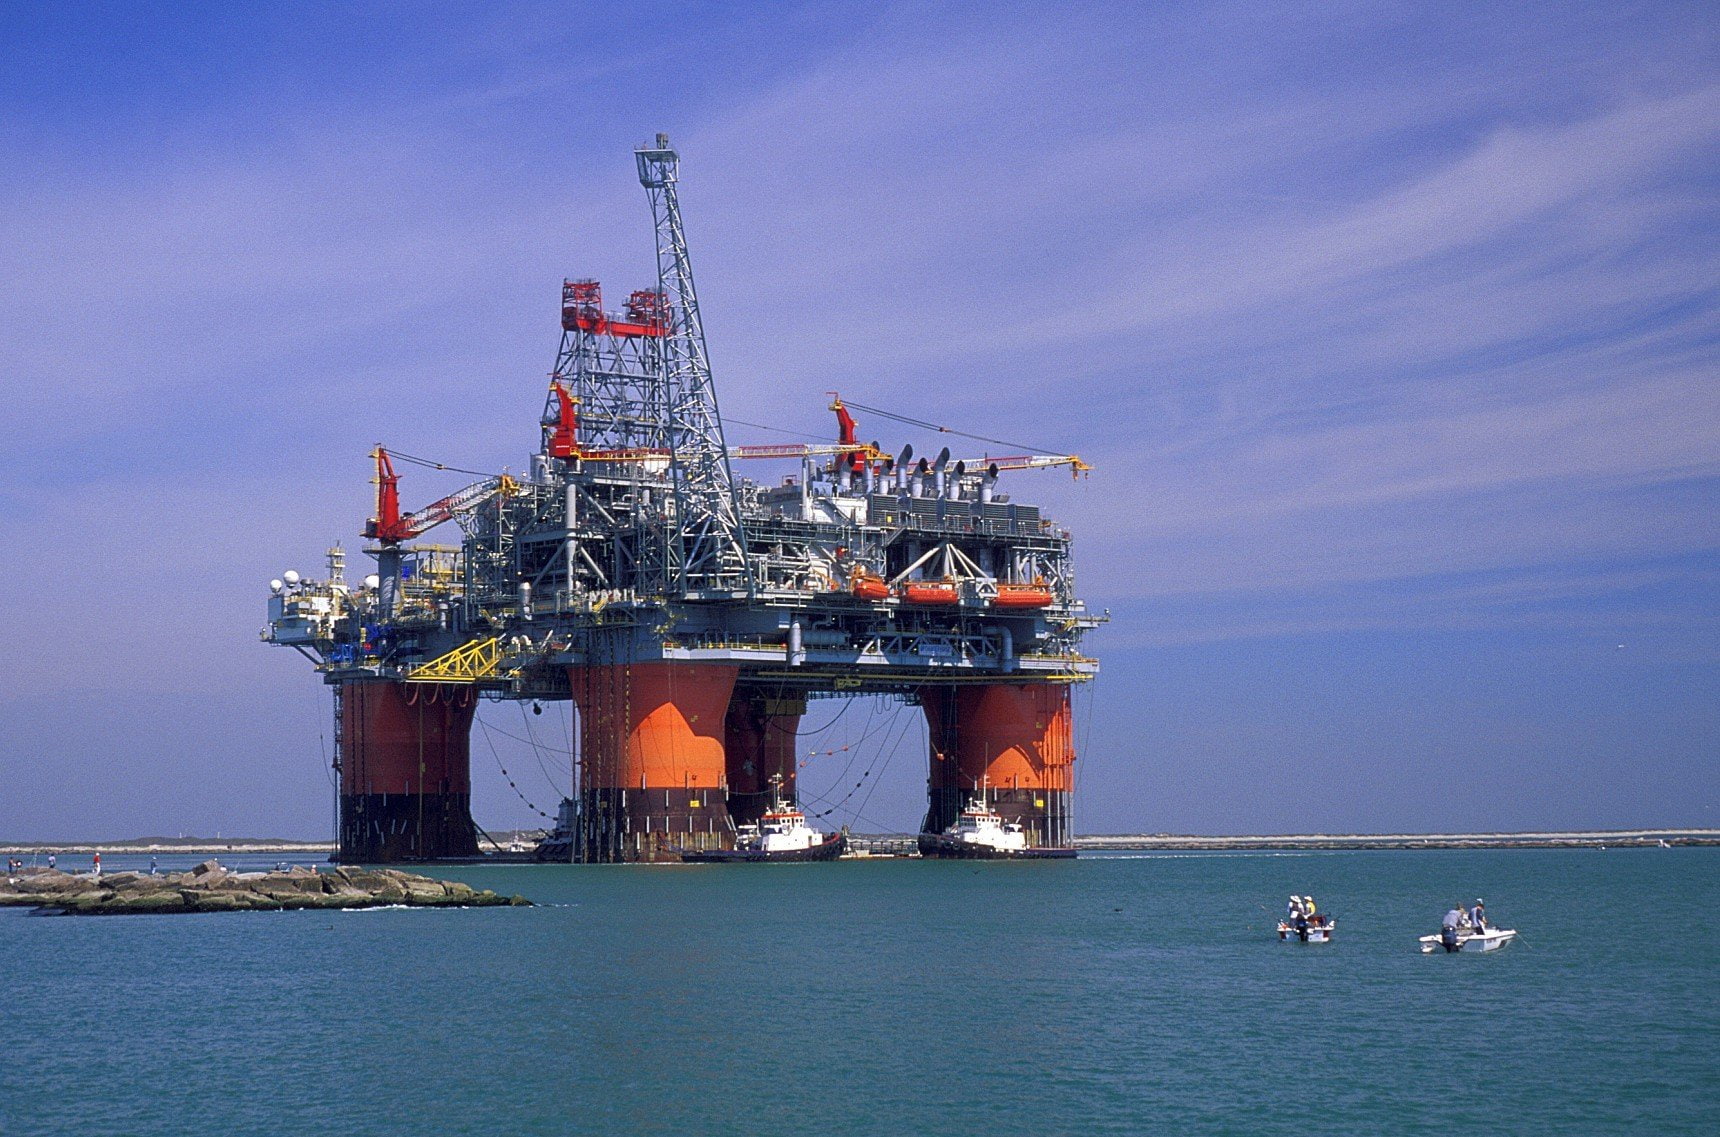 africa oil platform, sea, oil industry, sky, water, fuel and power generation